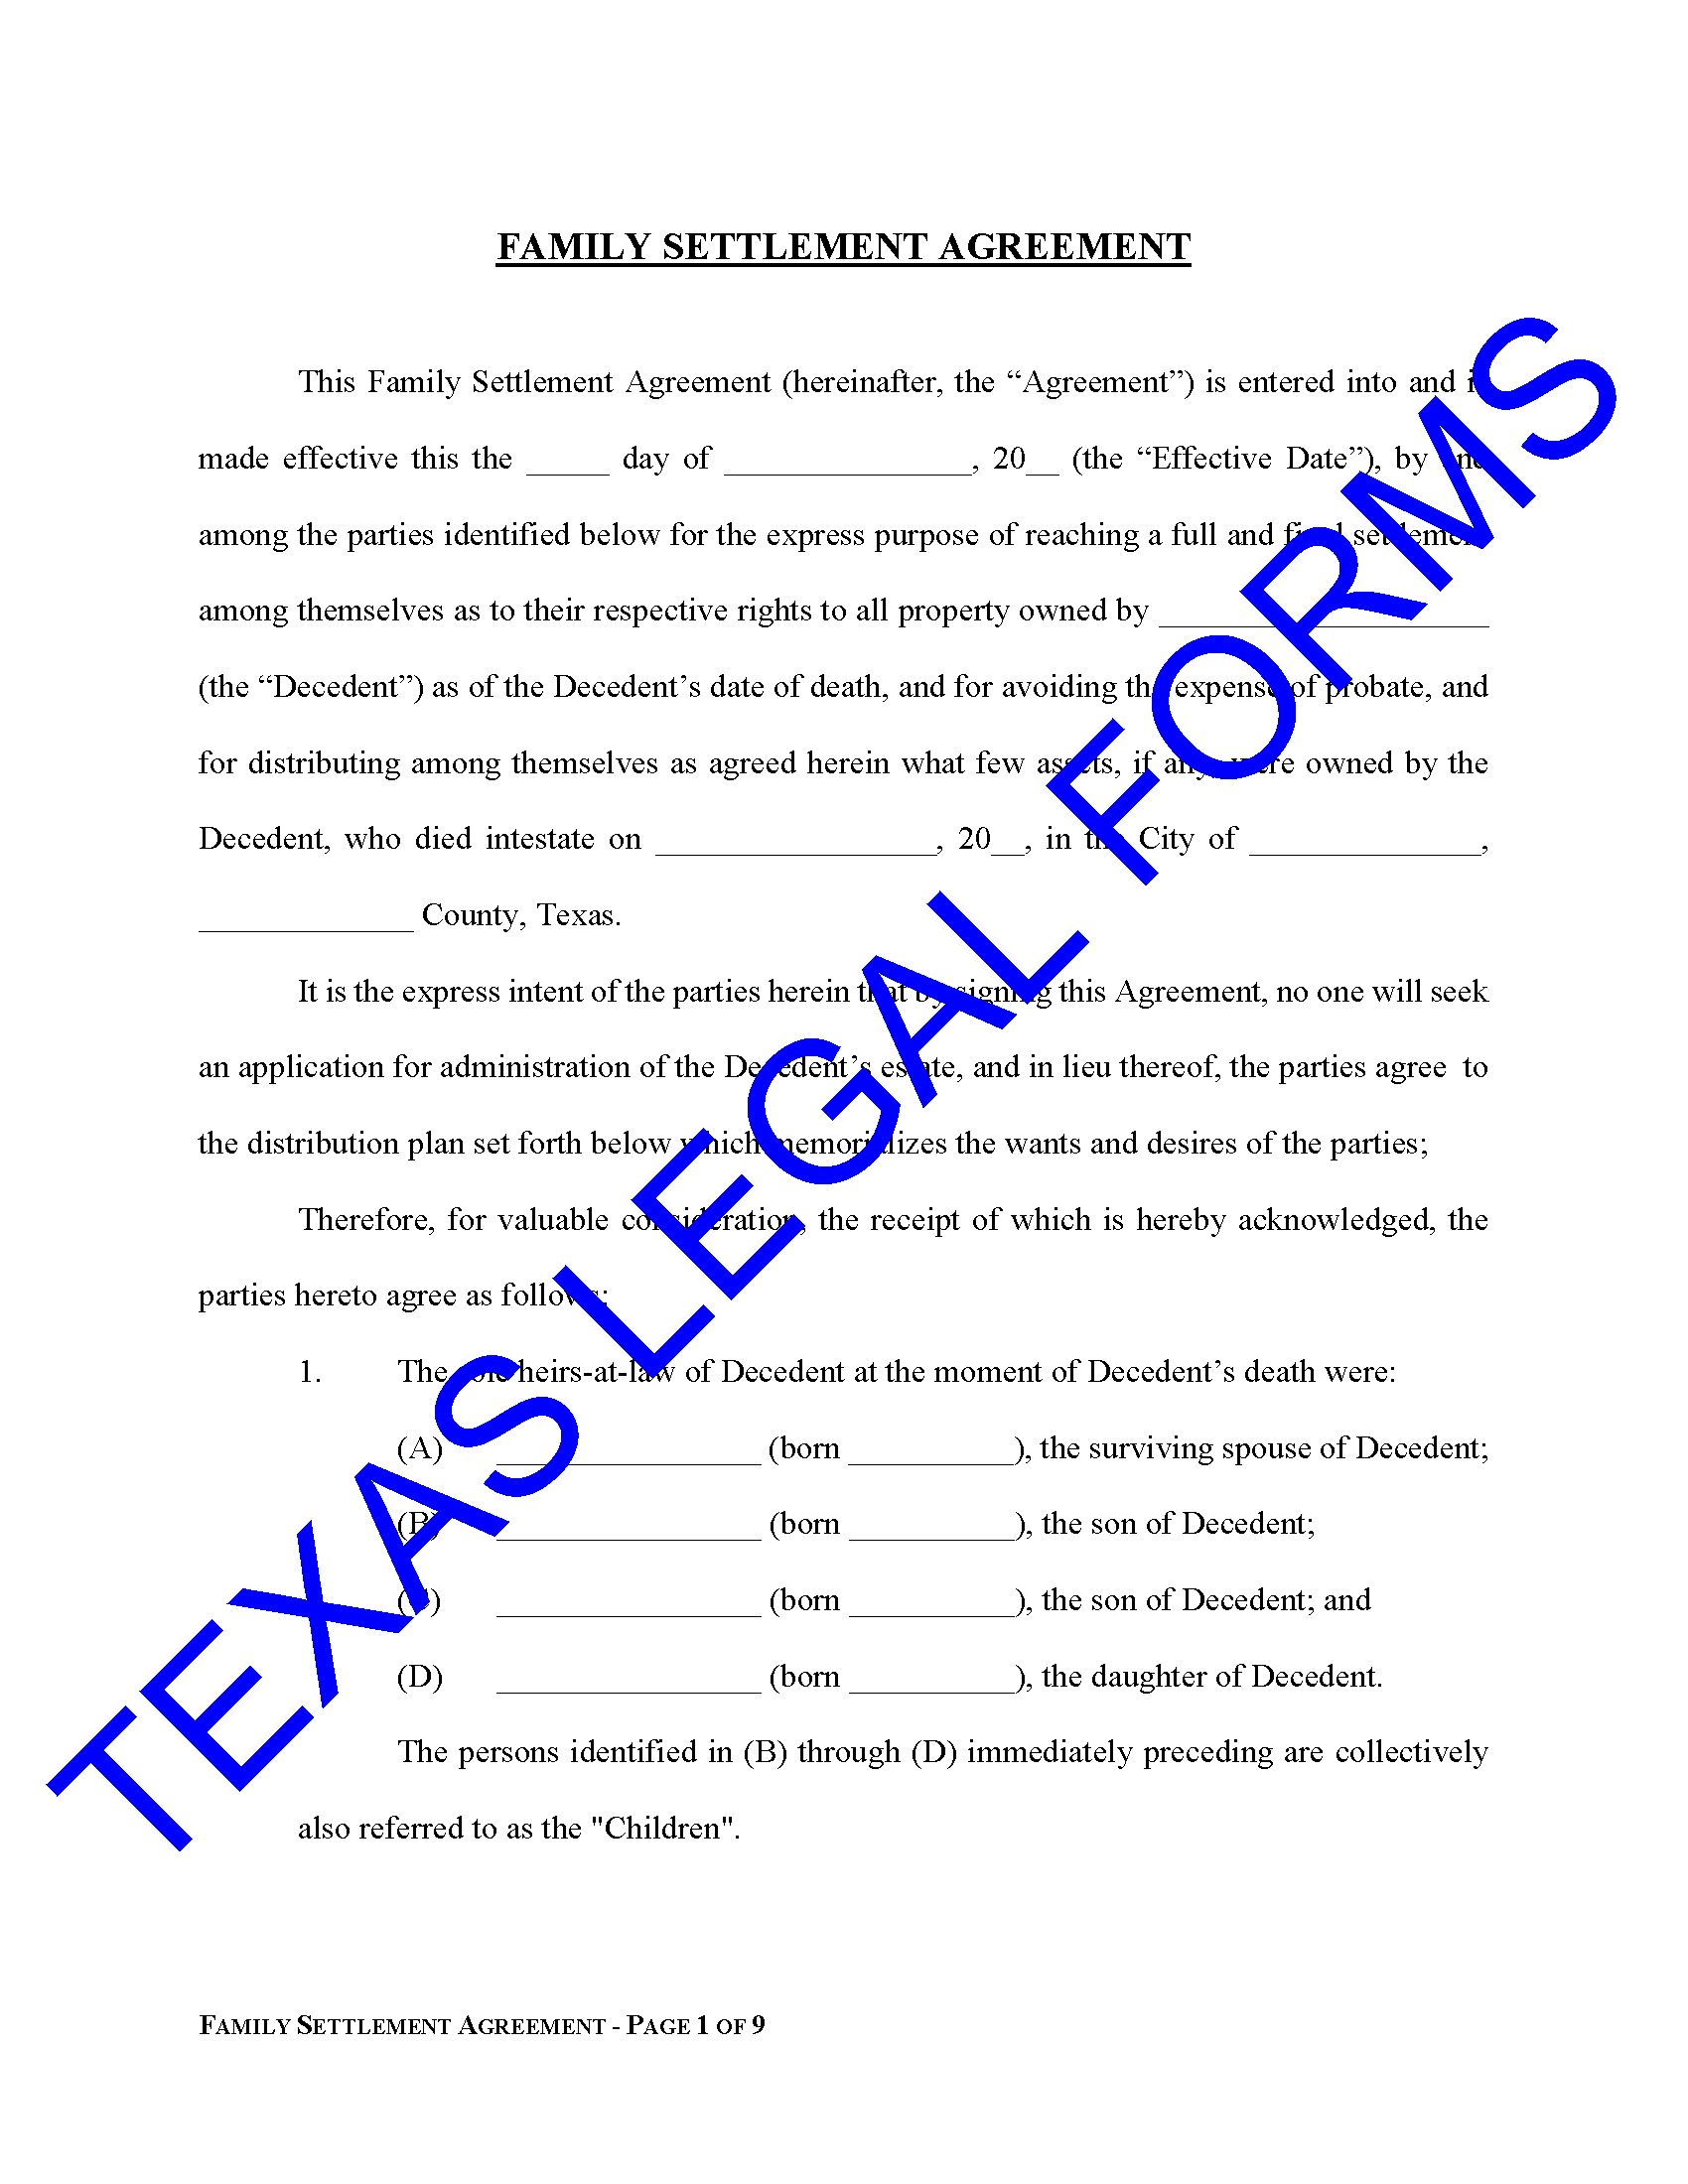 Family Settlement Agreement Texas Legal Forms by David Goodhart PLLC